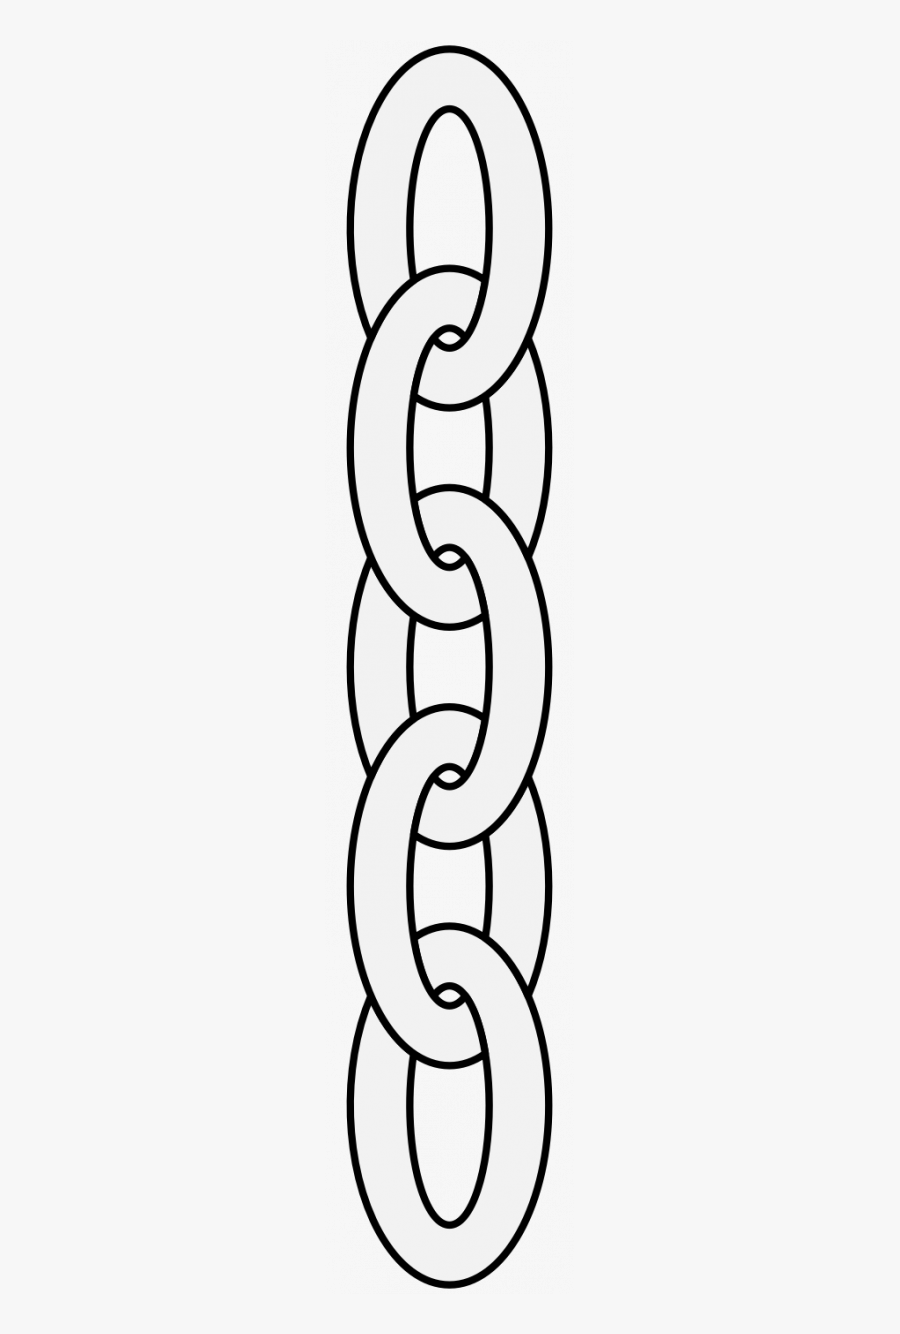 Chain Clipart Black And White, Transparent Clipart